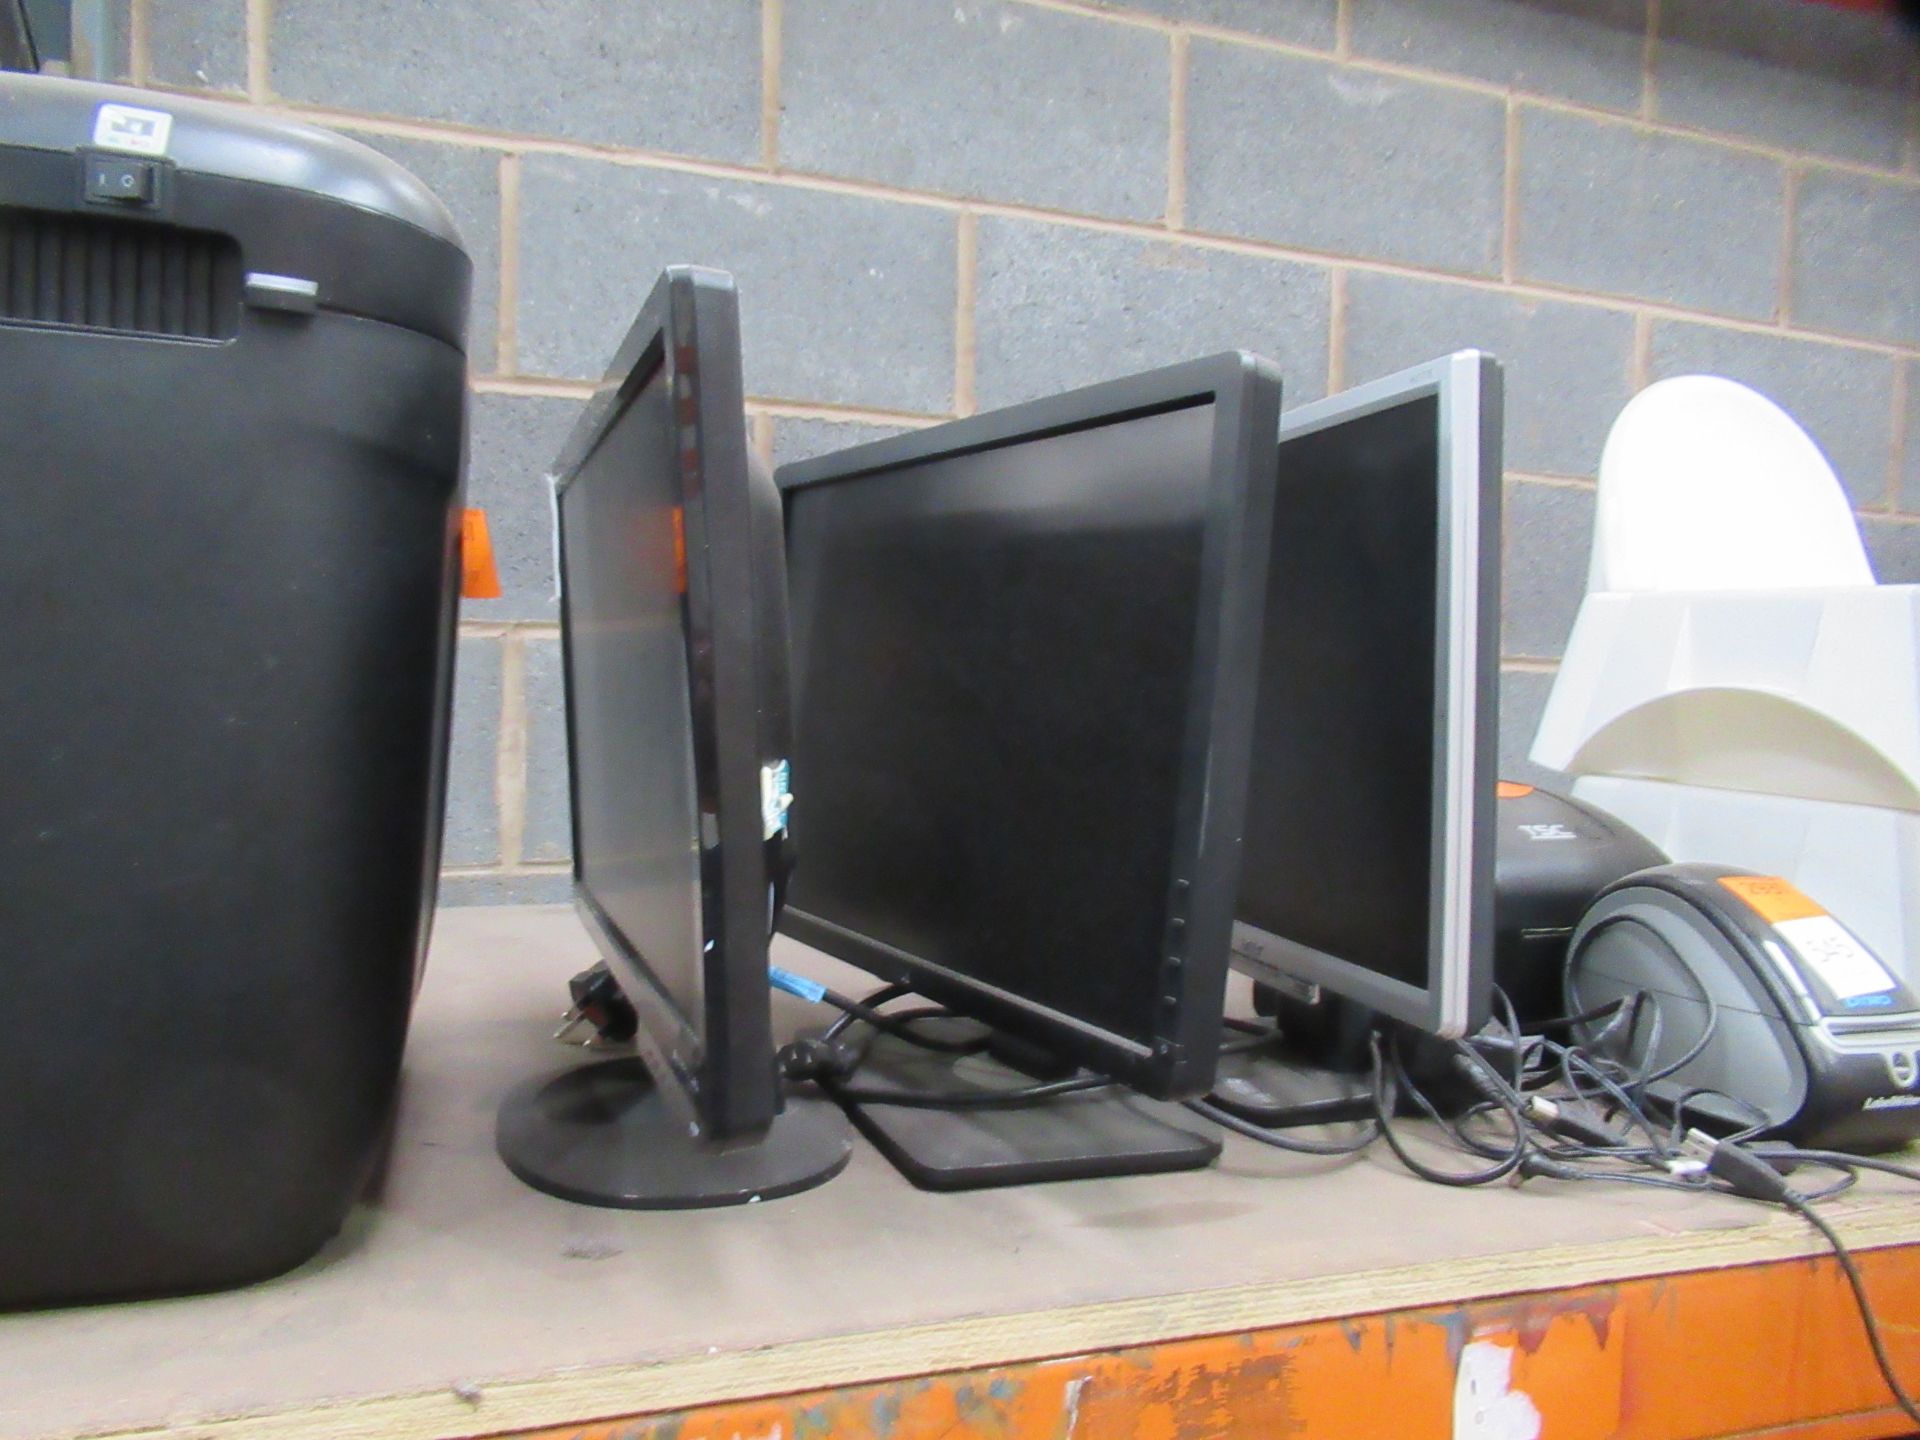 3x Various Monitors, 1x Paper Shredder and 2x Label Printers - Image 2 of 6